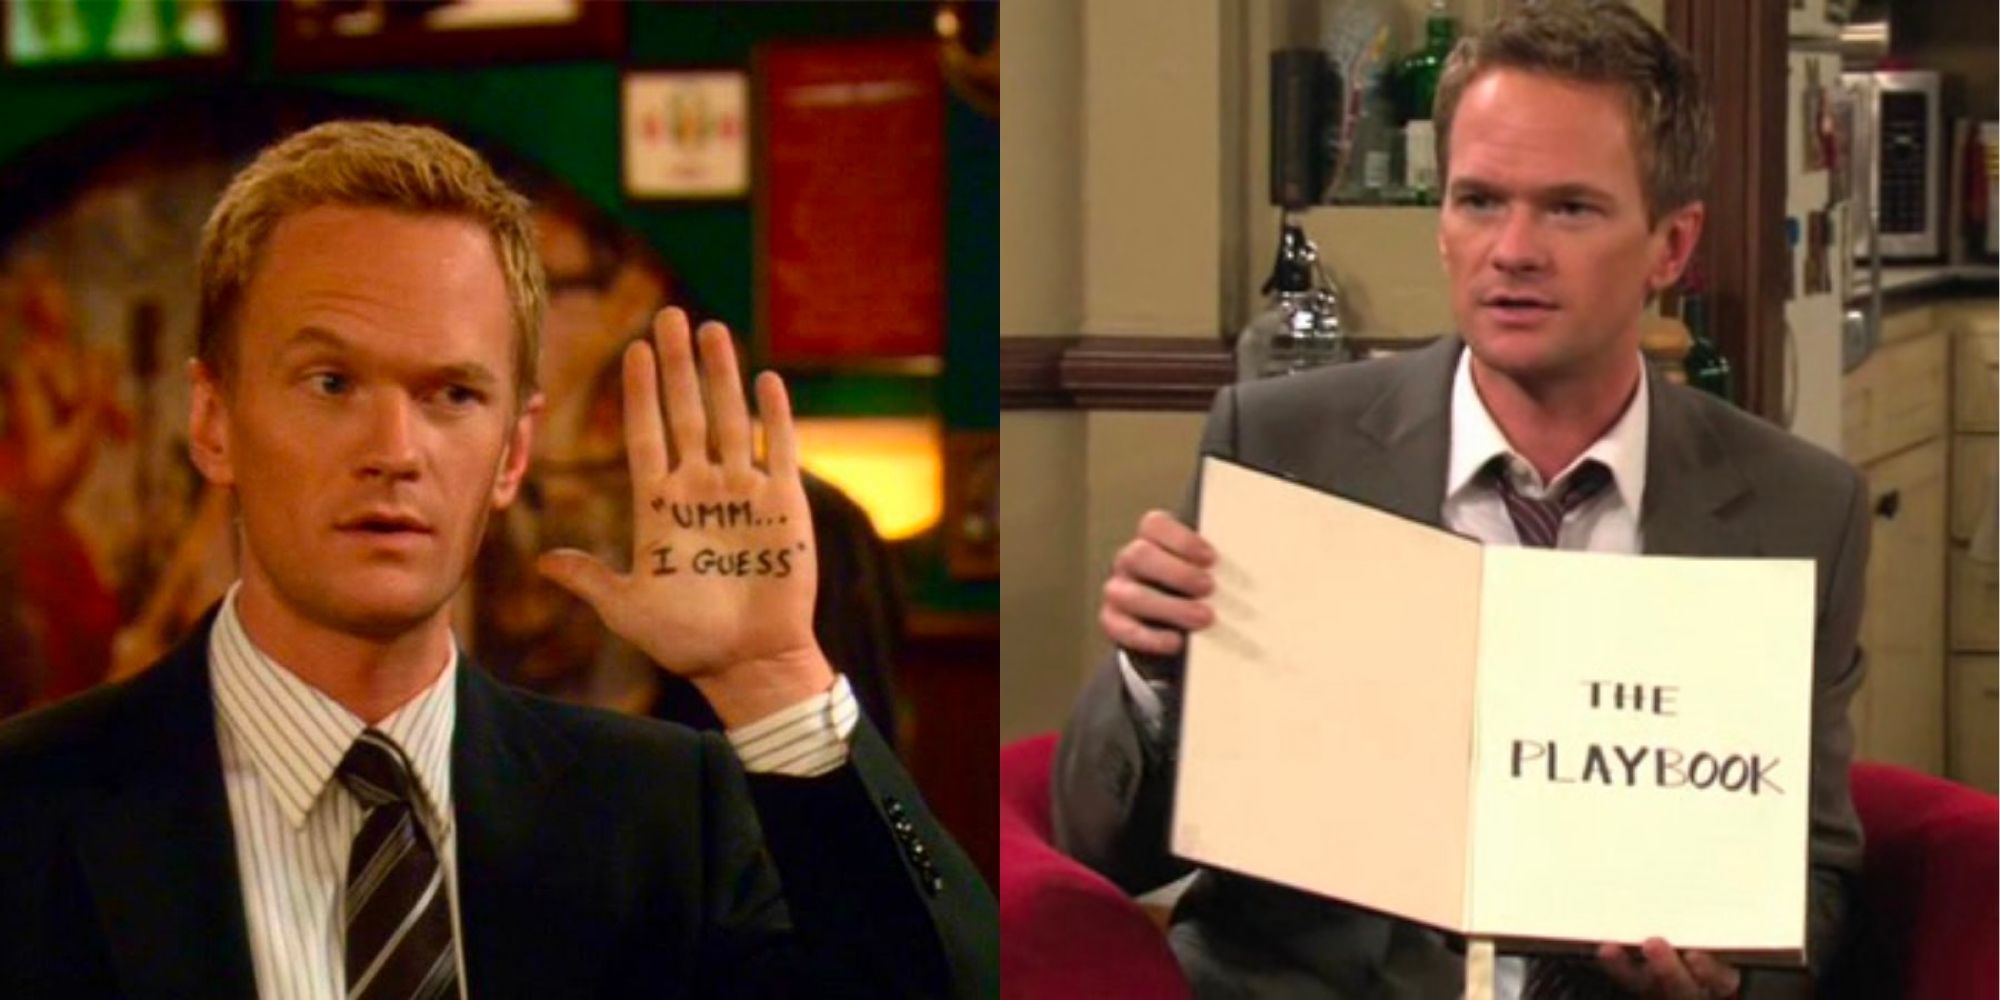 Neil Patrick Harris as Barney Stinson in How I Met Your Mother holding the play book